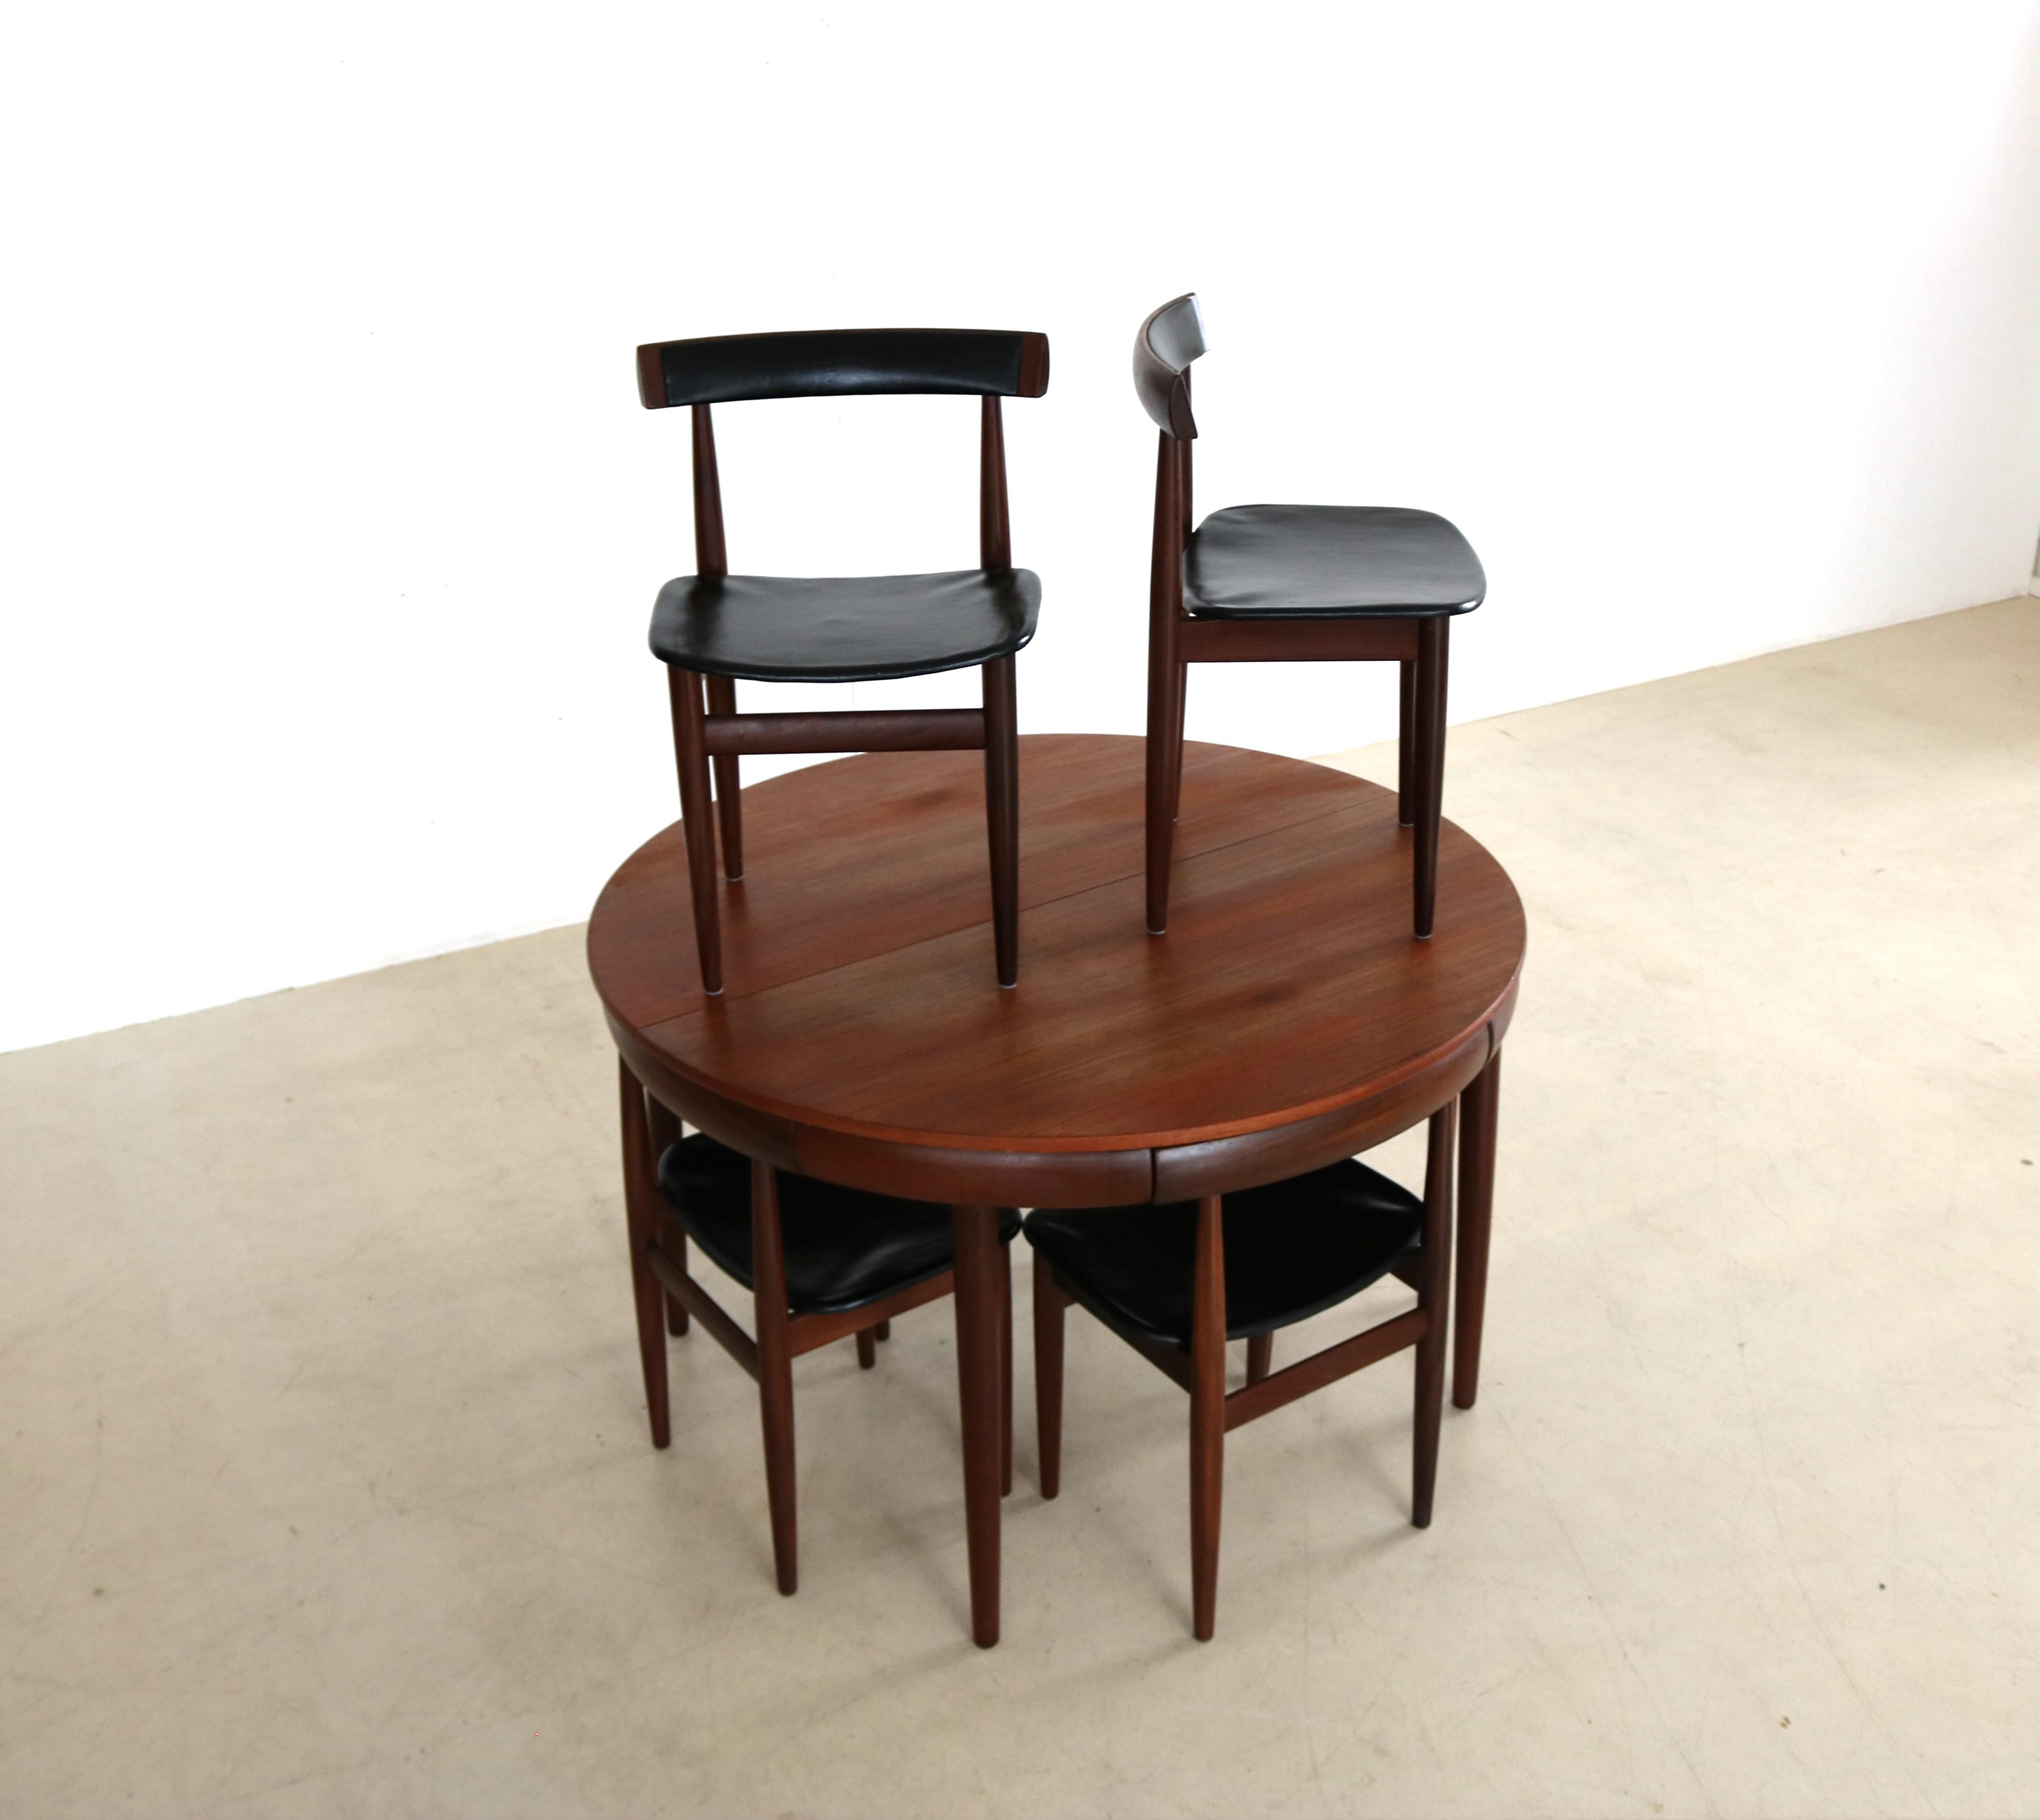 frem rojle dining table and chairs